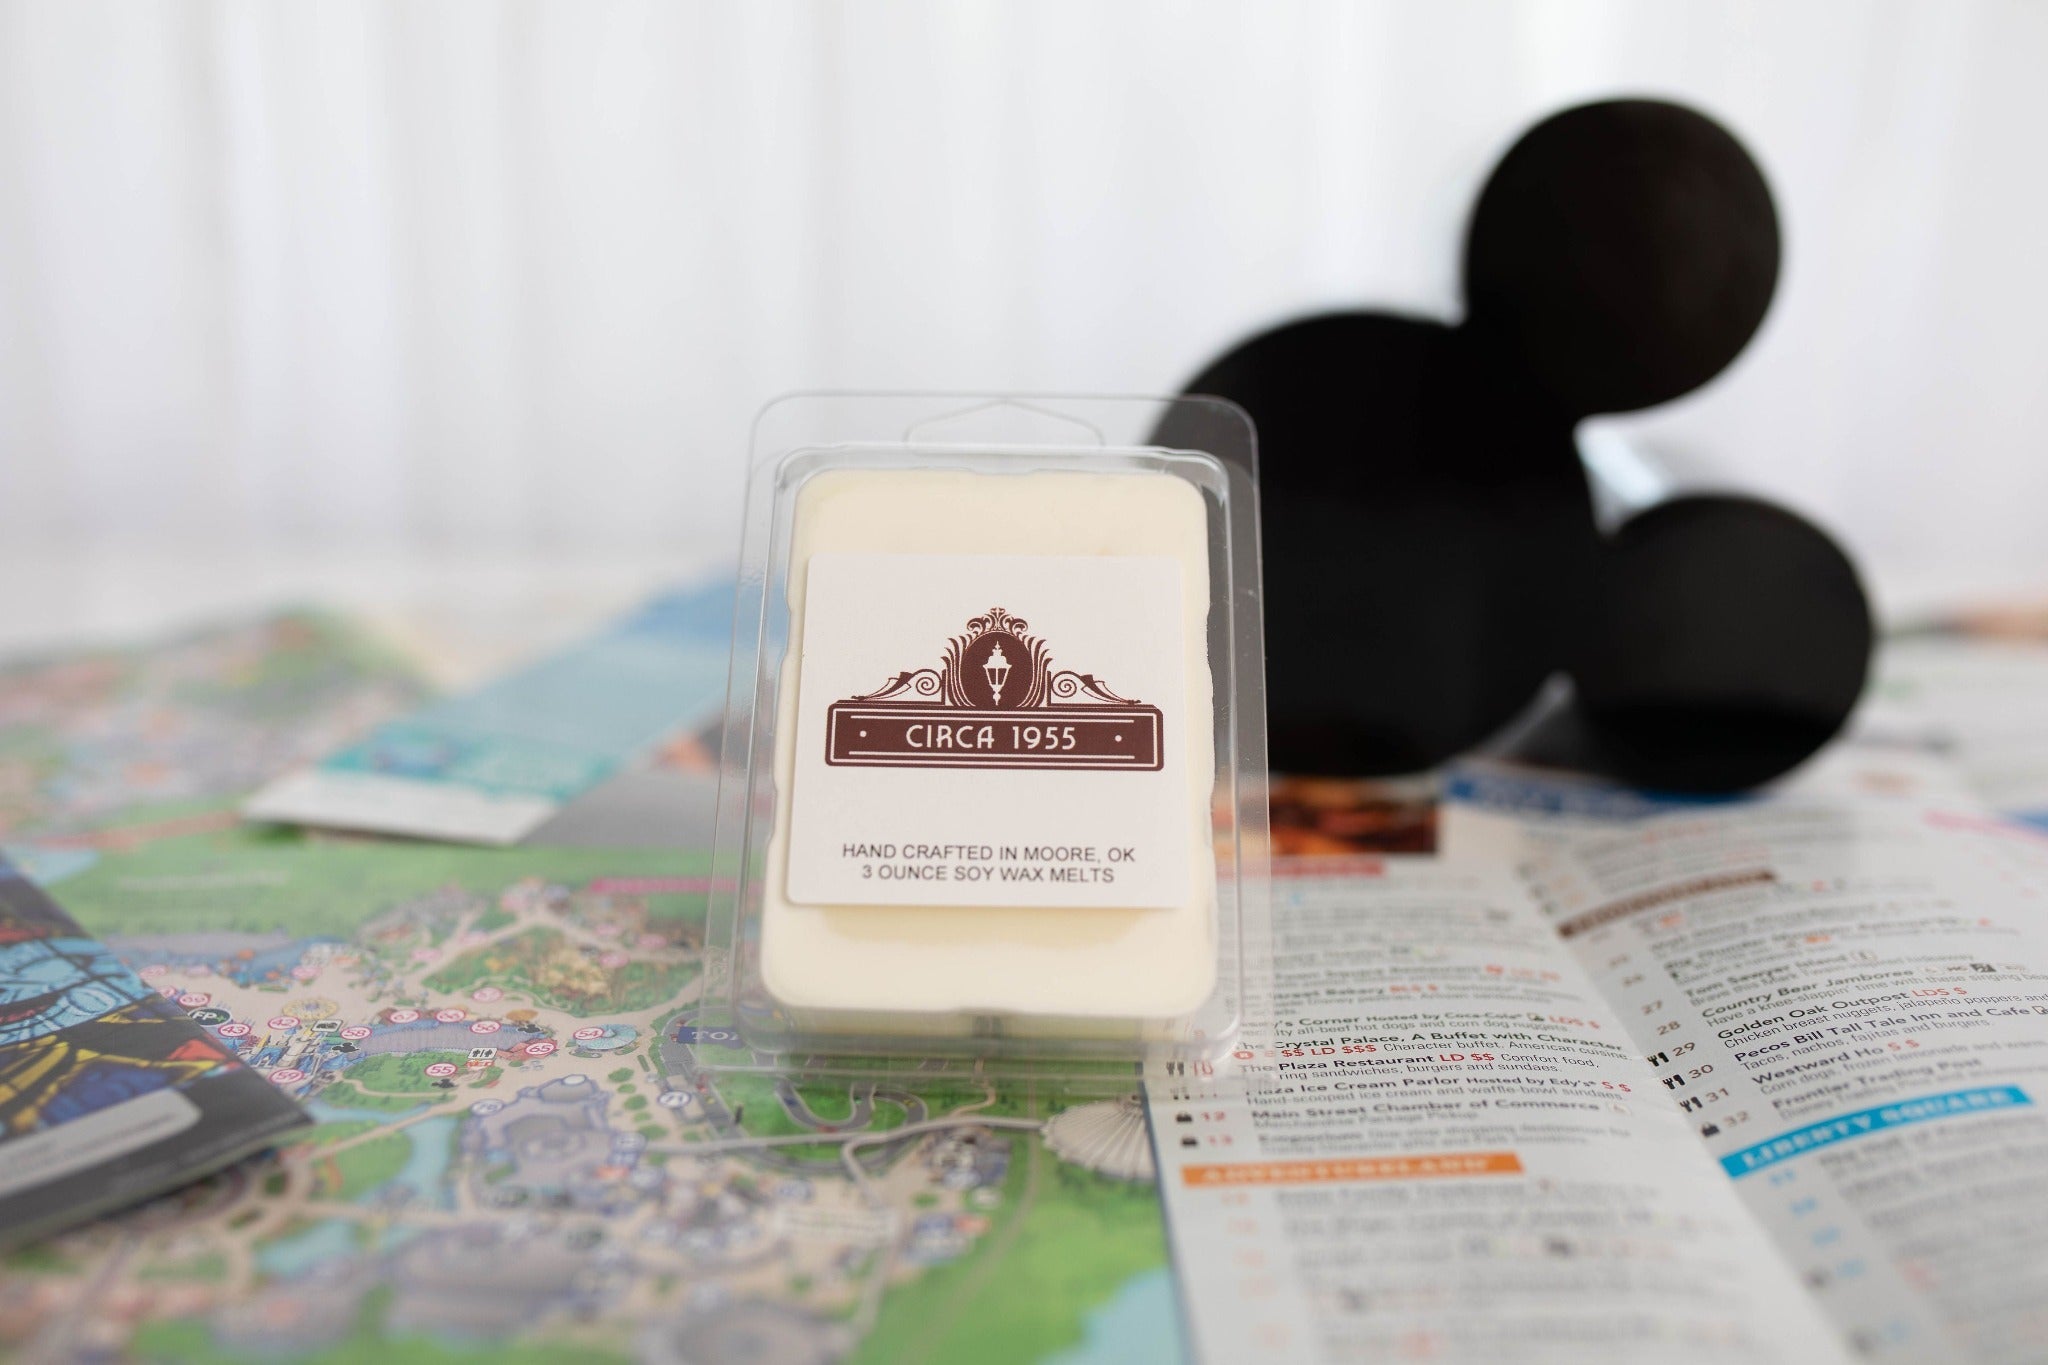 A plastic, six-cavity clamshell melt sitting on top of a map of Disneyland with a black mickey head icon in the background.